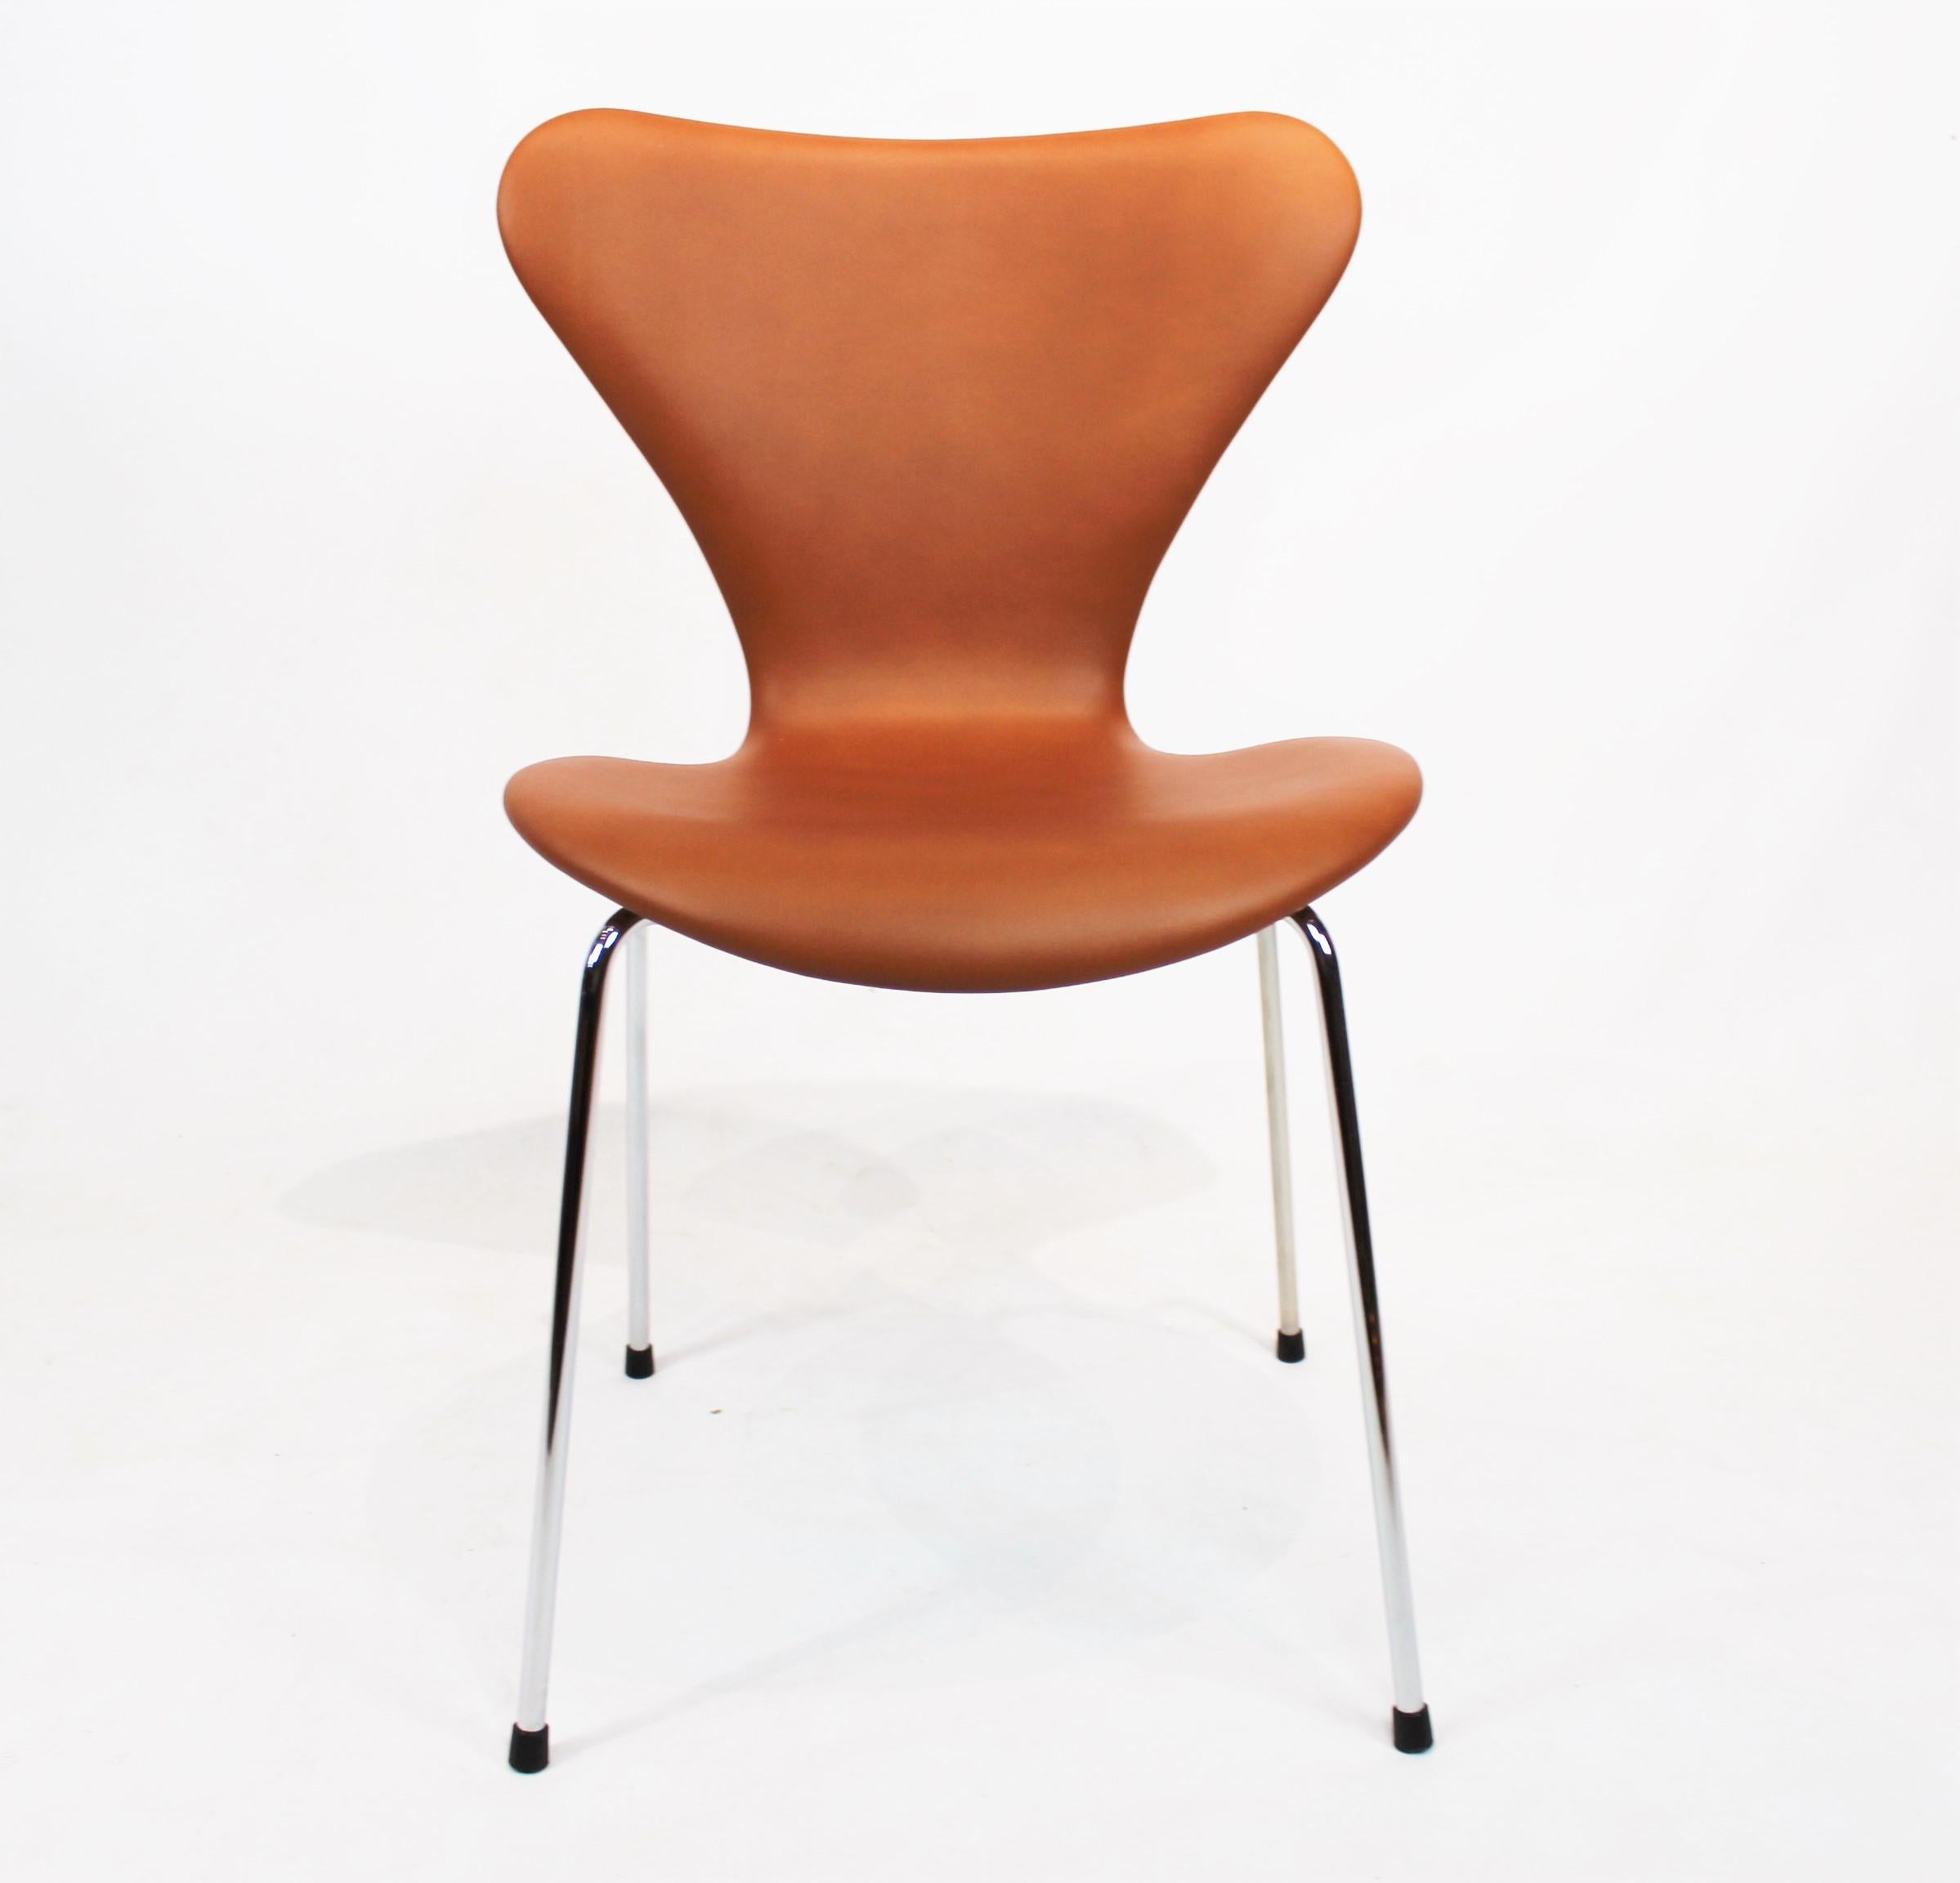 Exquisite Set of Four Series Seven Chairs, Model 3107, Wrapped in Luxurious Cognac Leather, a testament to Arne Jacobsen's visionary design.

These chairs, a classic manifestation of Arne Jacobsen's iconic Series Seven design, are upholstered in